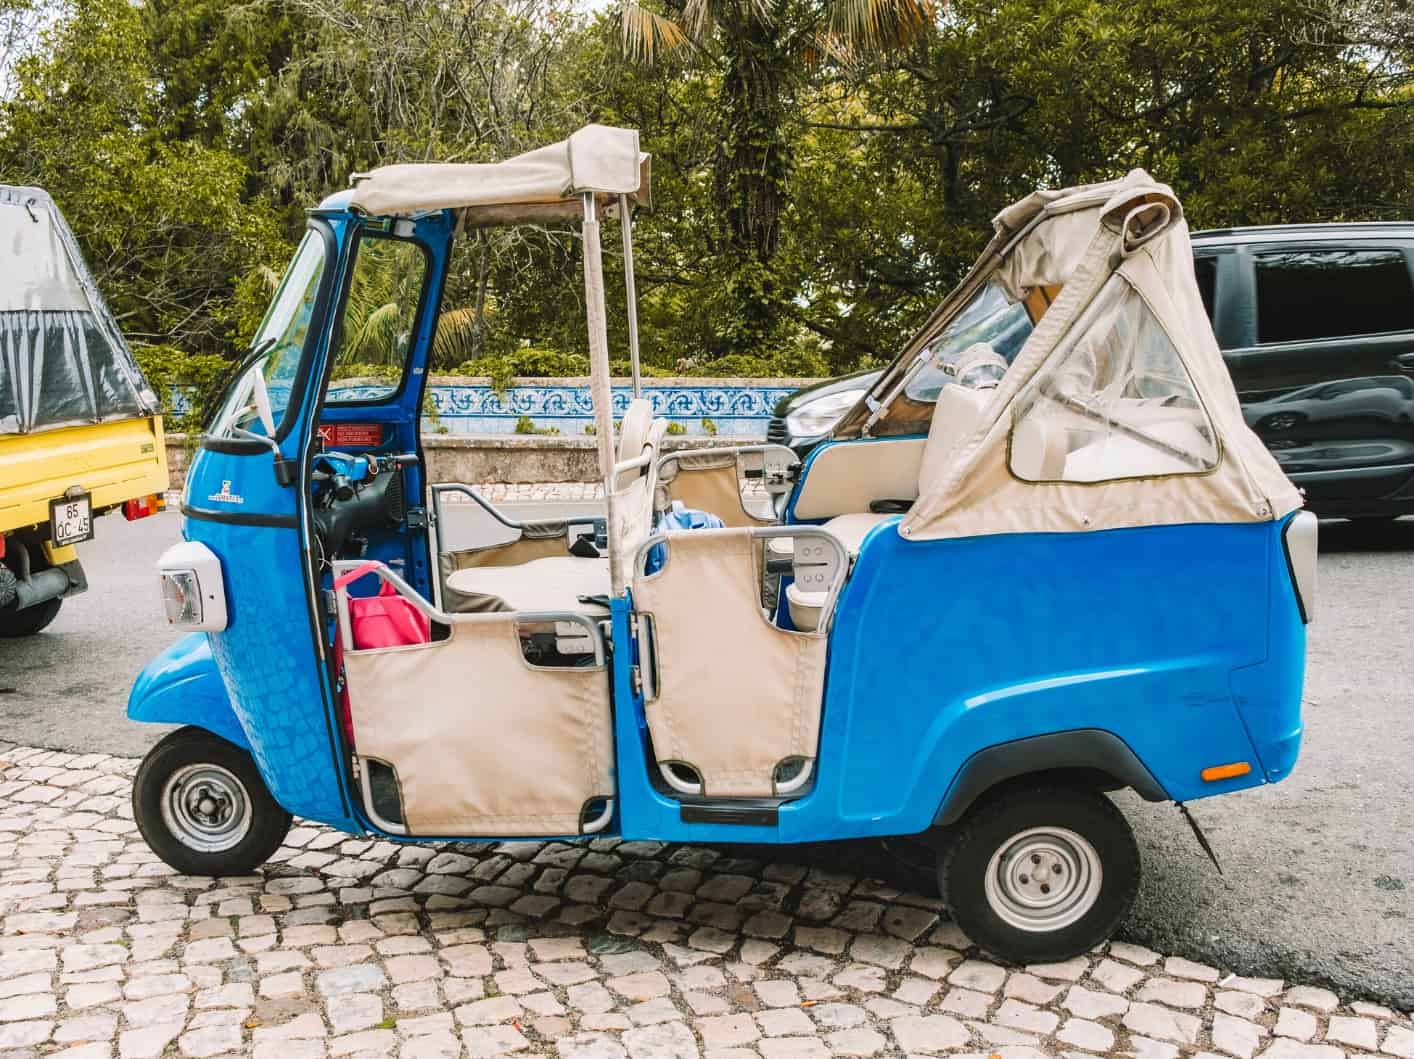 The blue tuktuk we hired to take us up the hill in Sintra. 